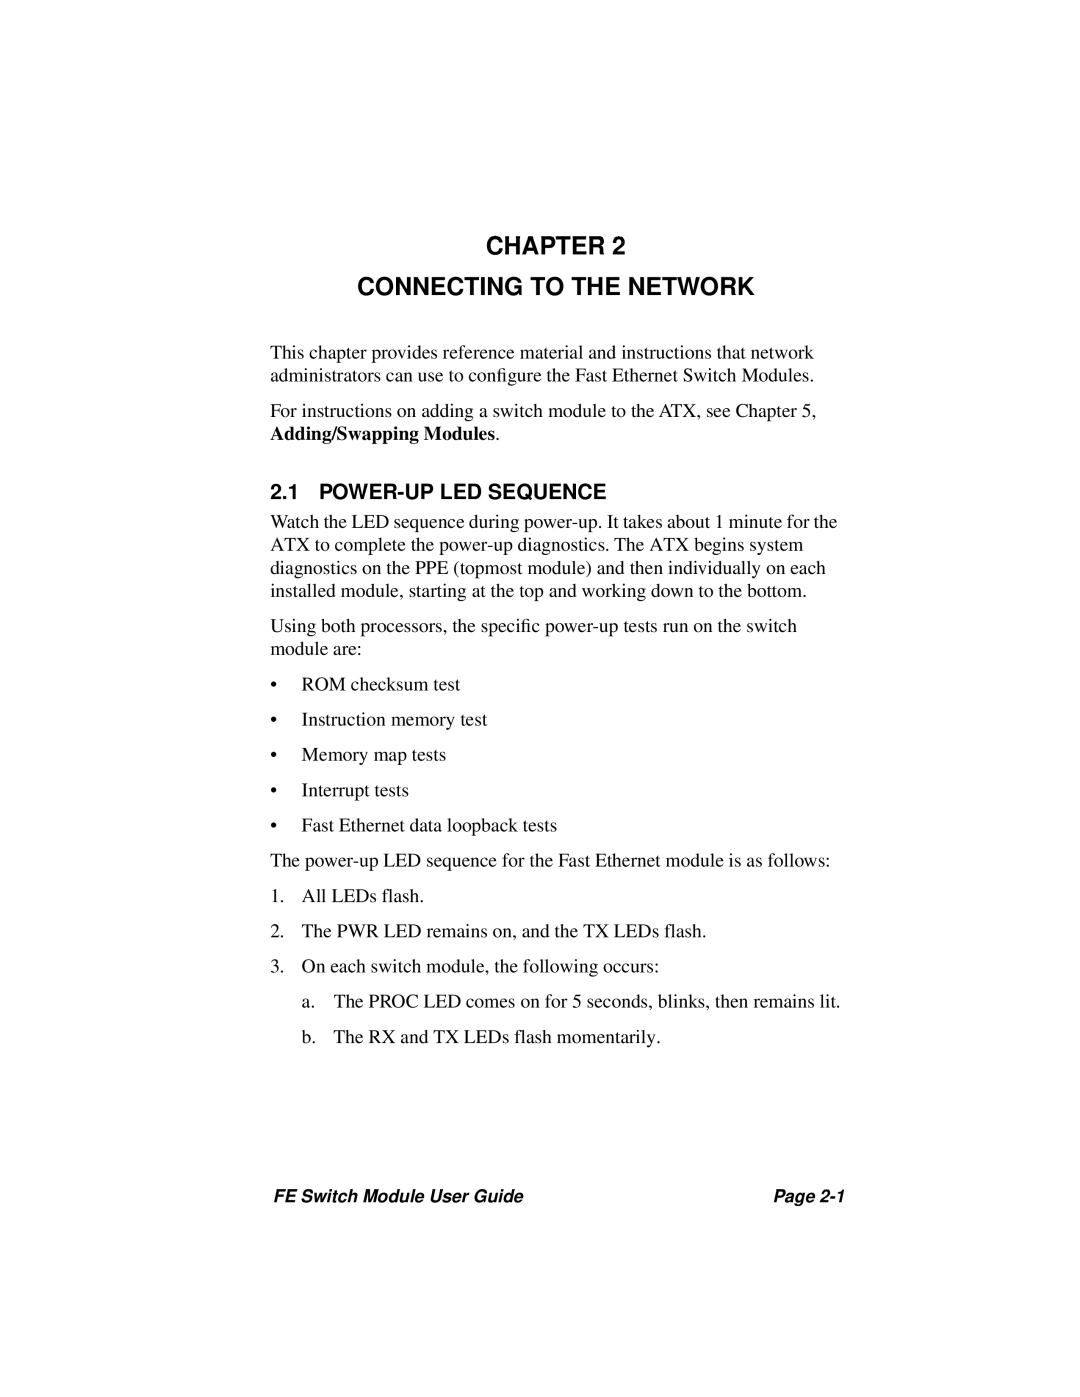 Cabletron Systems 3H08-04, 3H02-04 manual Chapter Connecting To The Network, Power-Up Led Sequence 